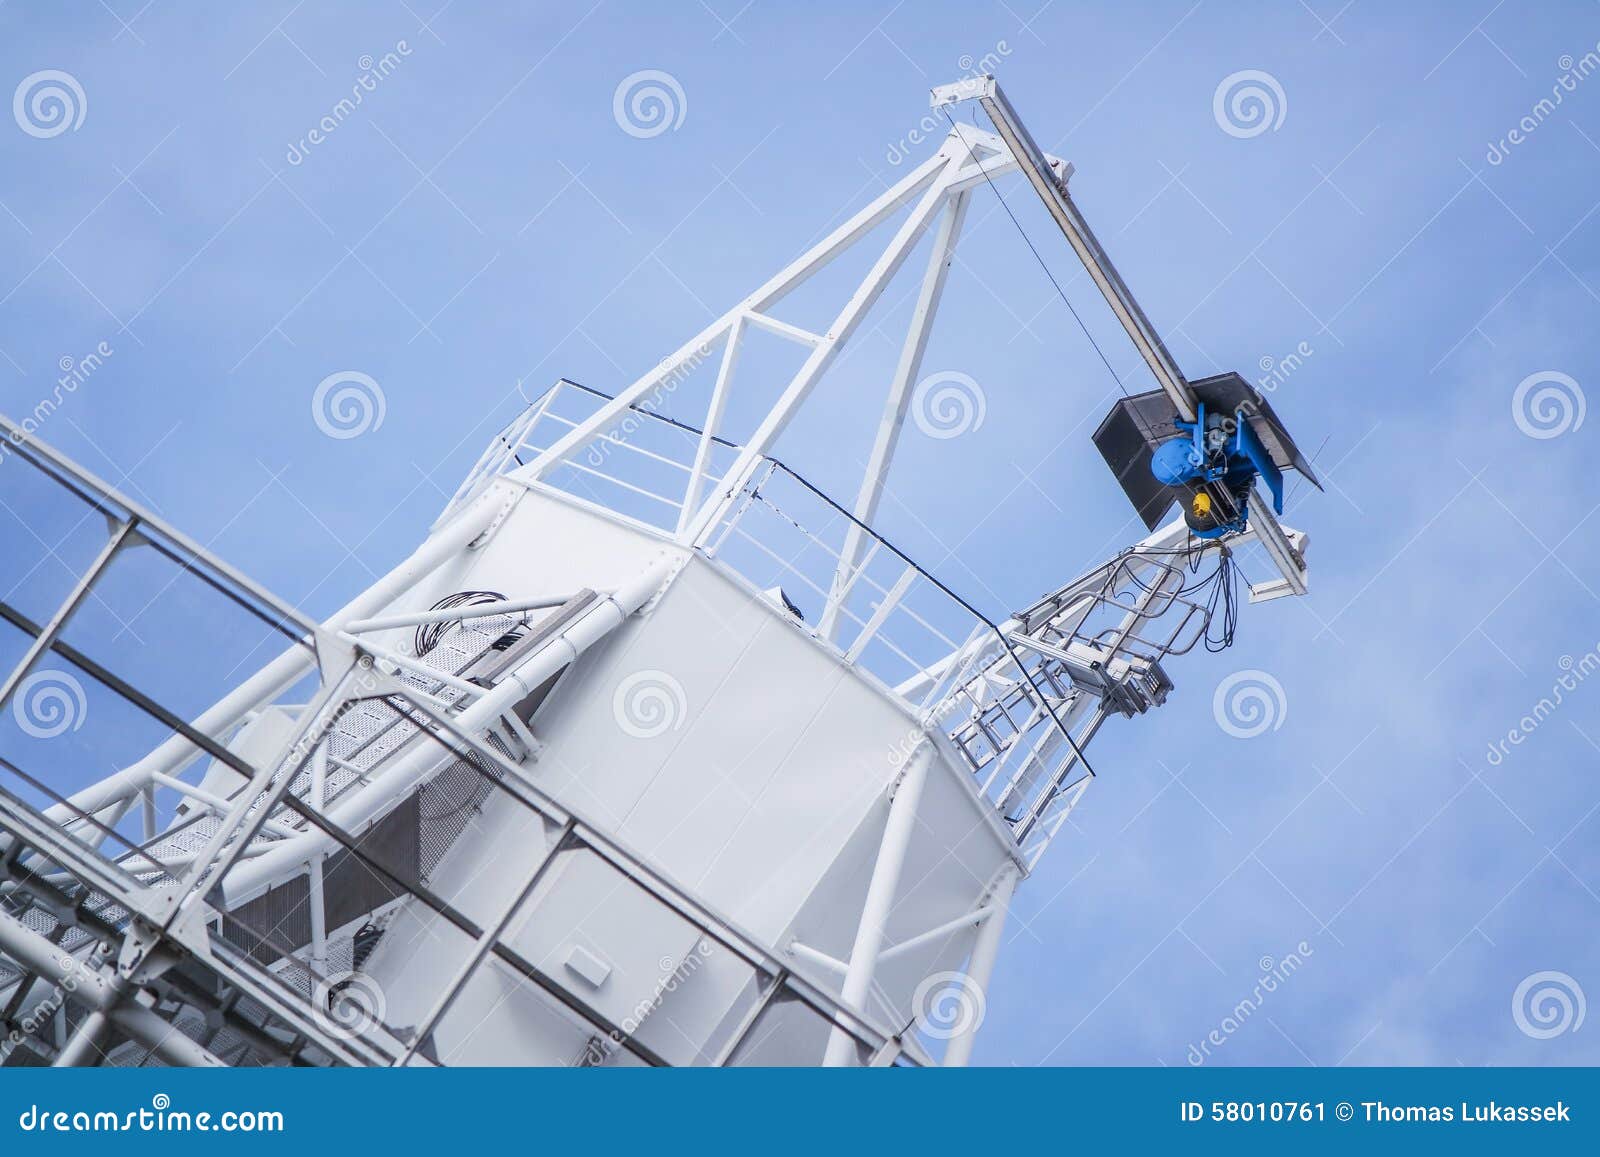 Listening into the Outer Space Stock Image - Image of aerial, antennae ...